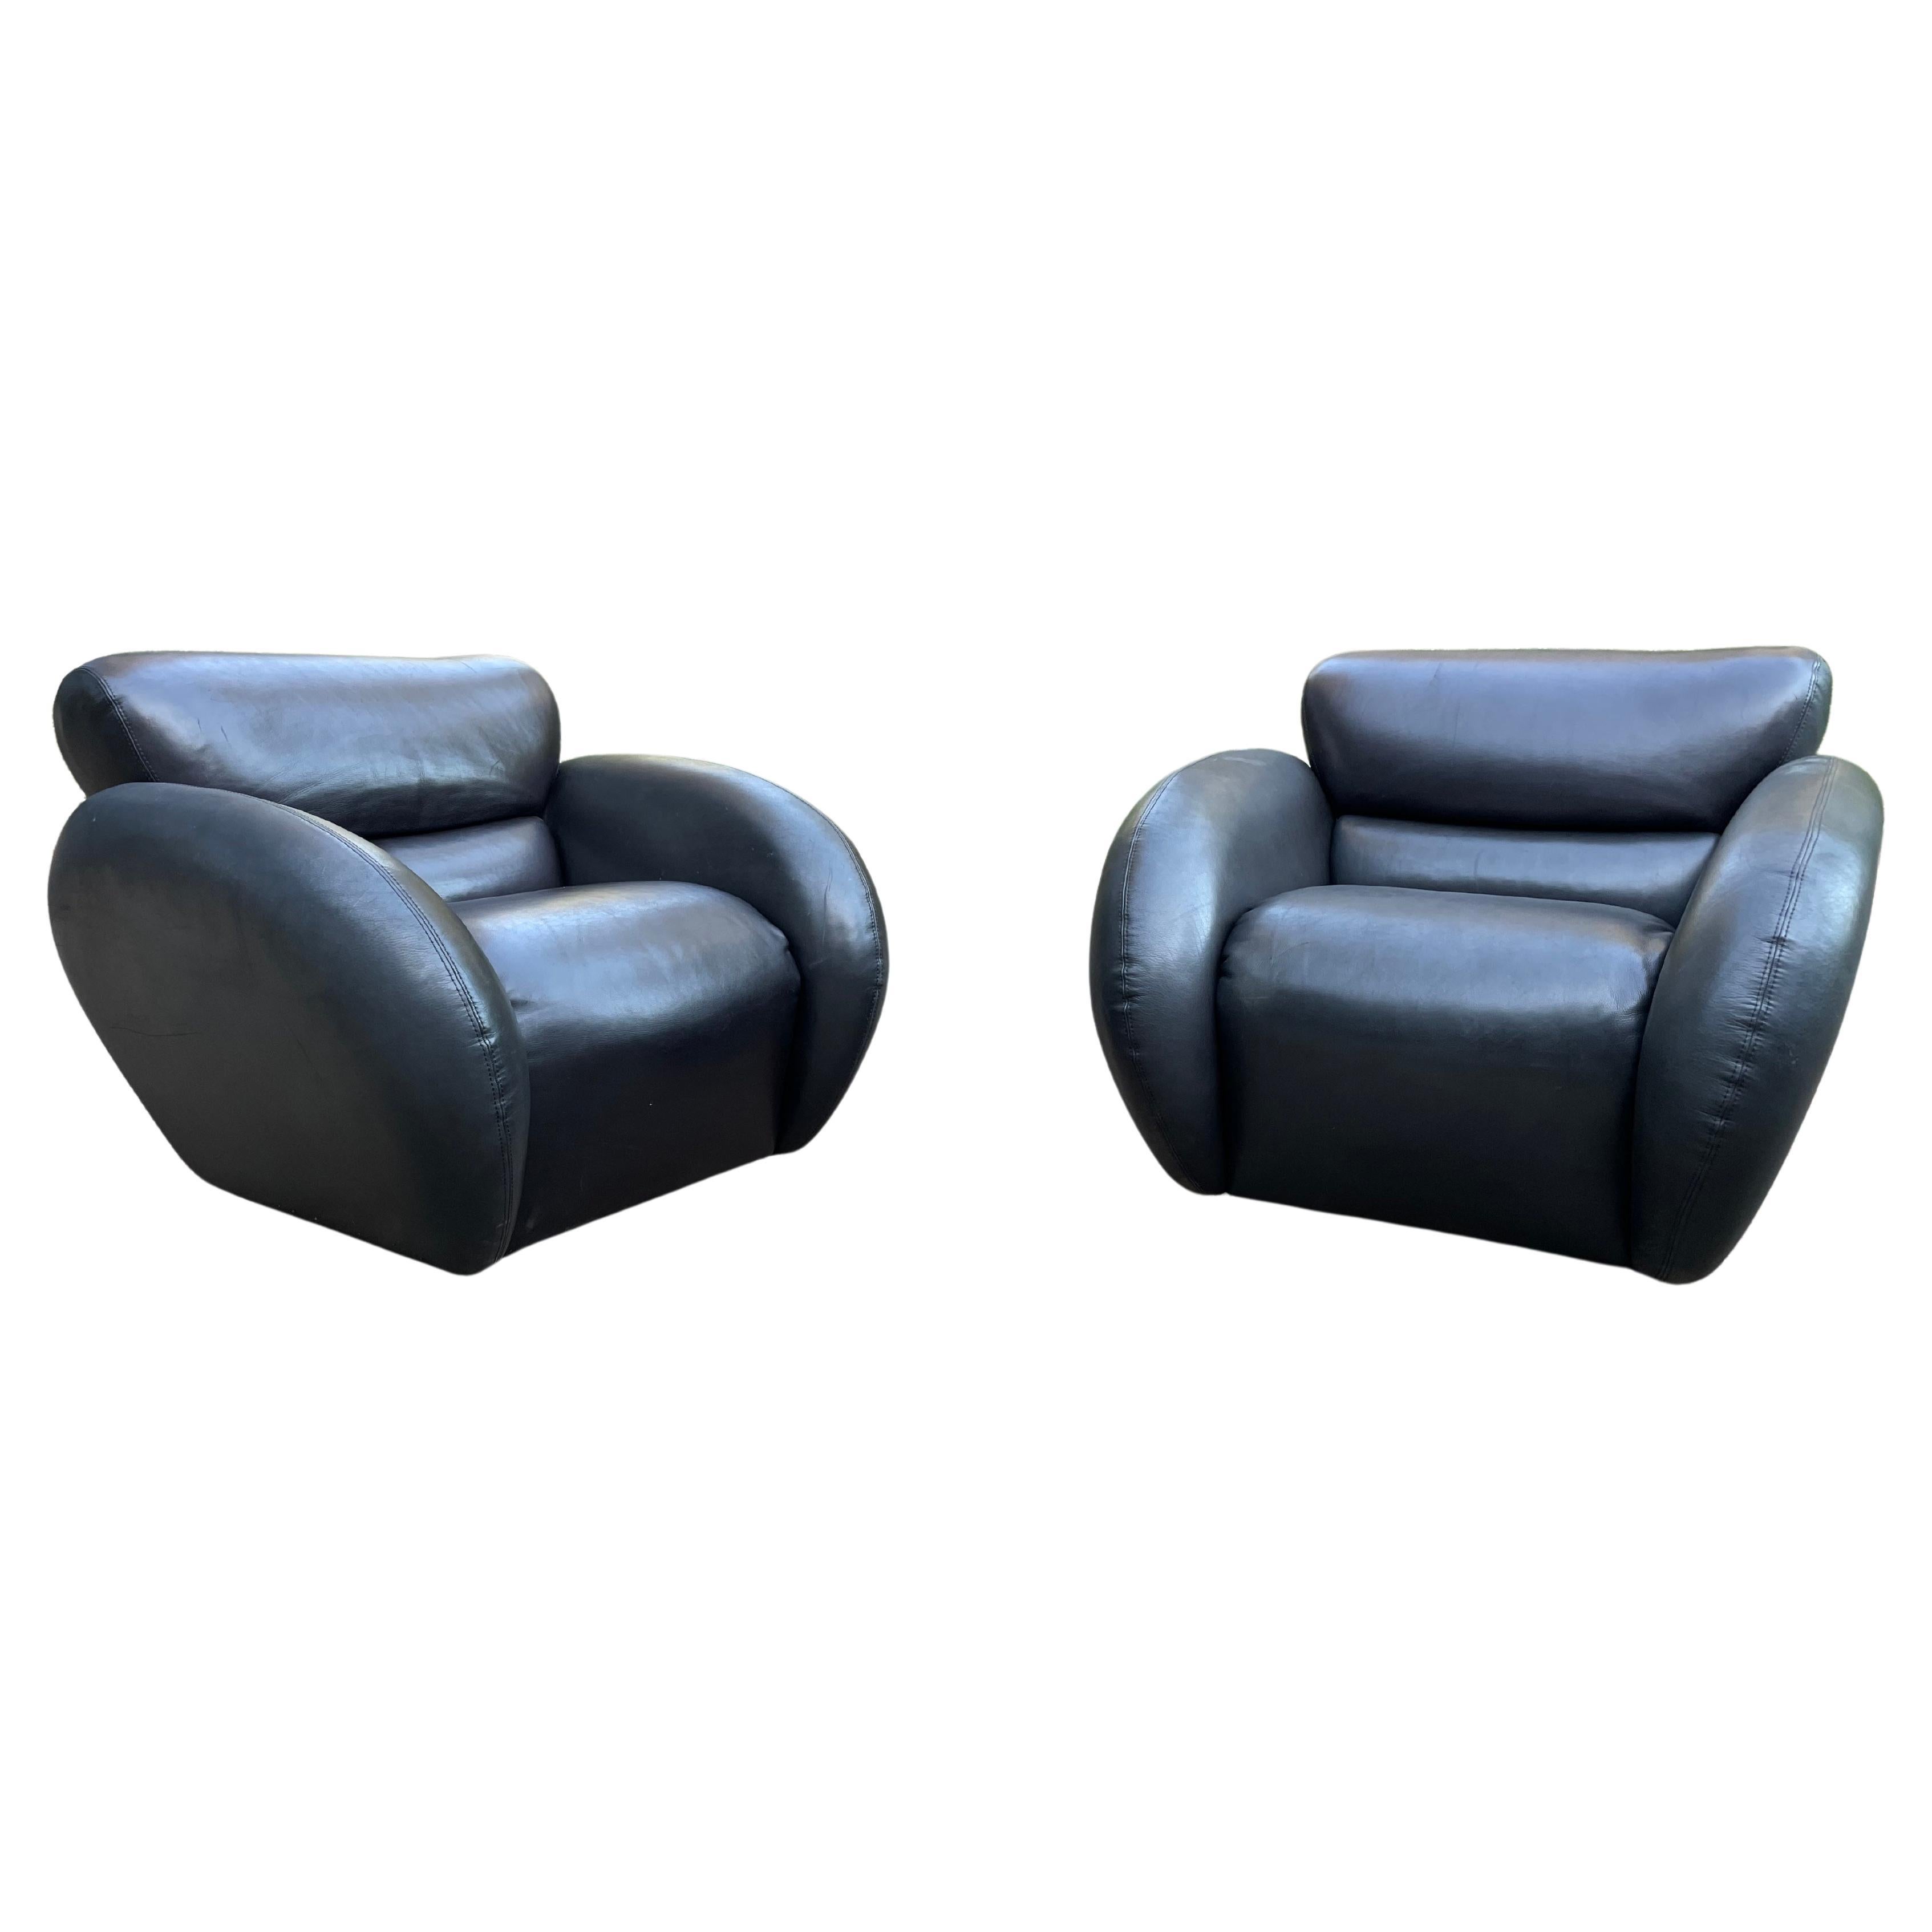 Mid-Century Modern Large Scale Leather Swivel Lounge Chairs for Directional For Sale